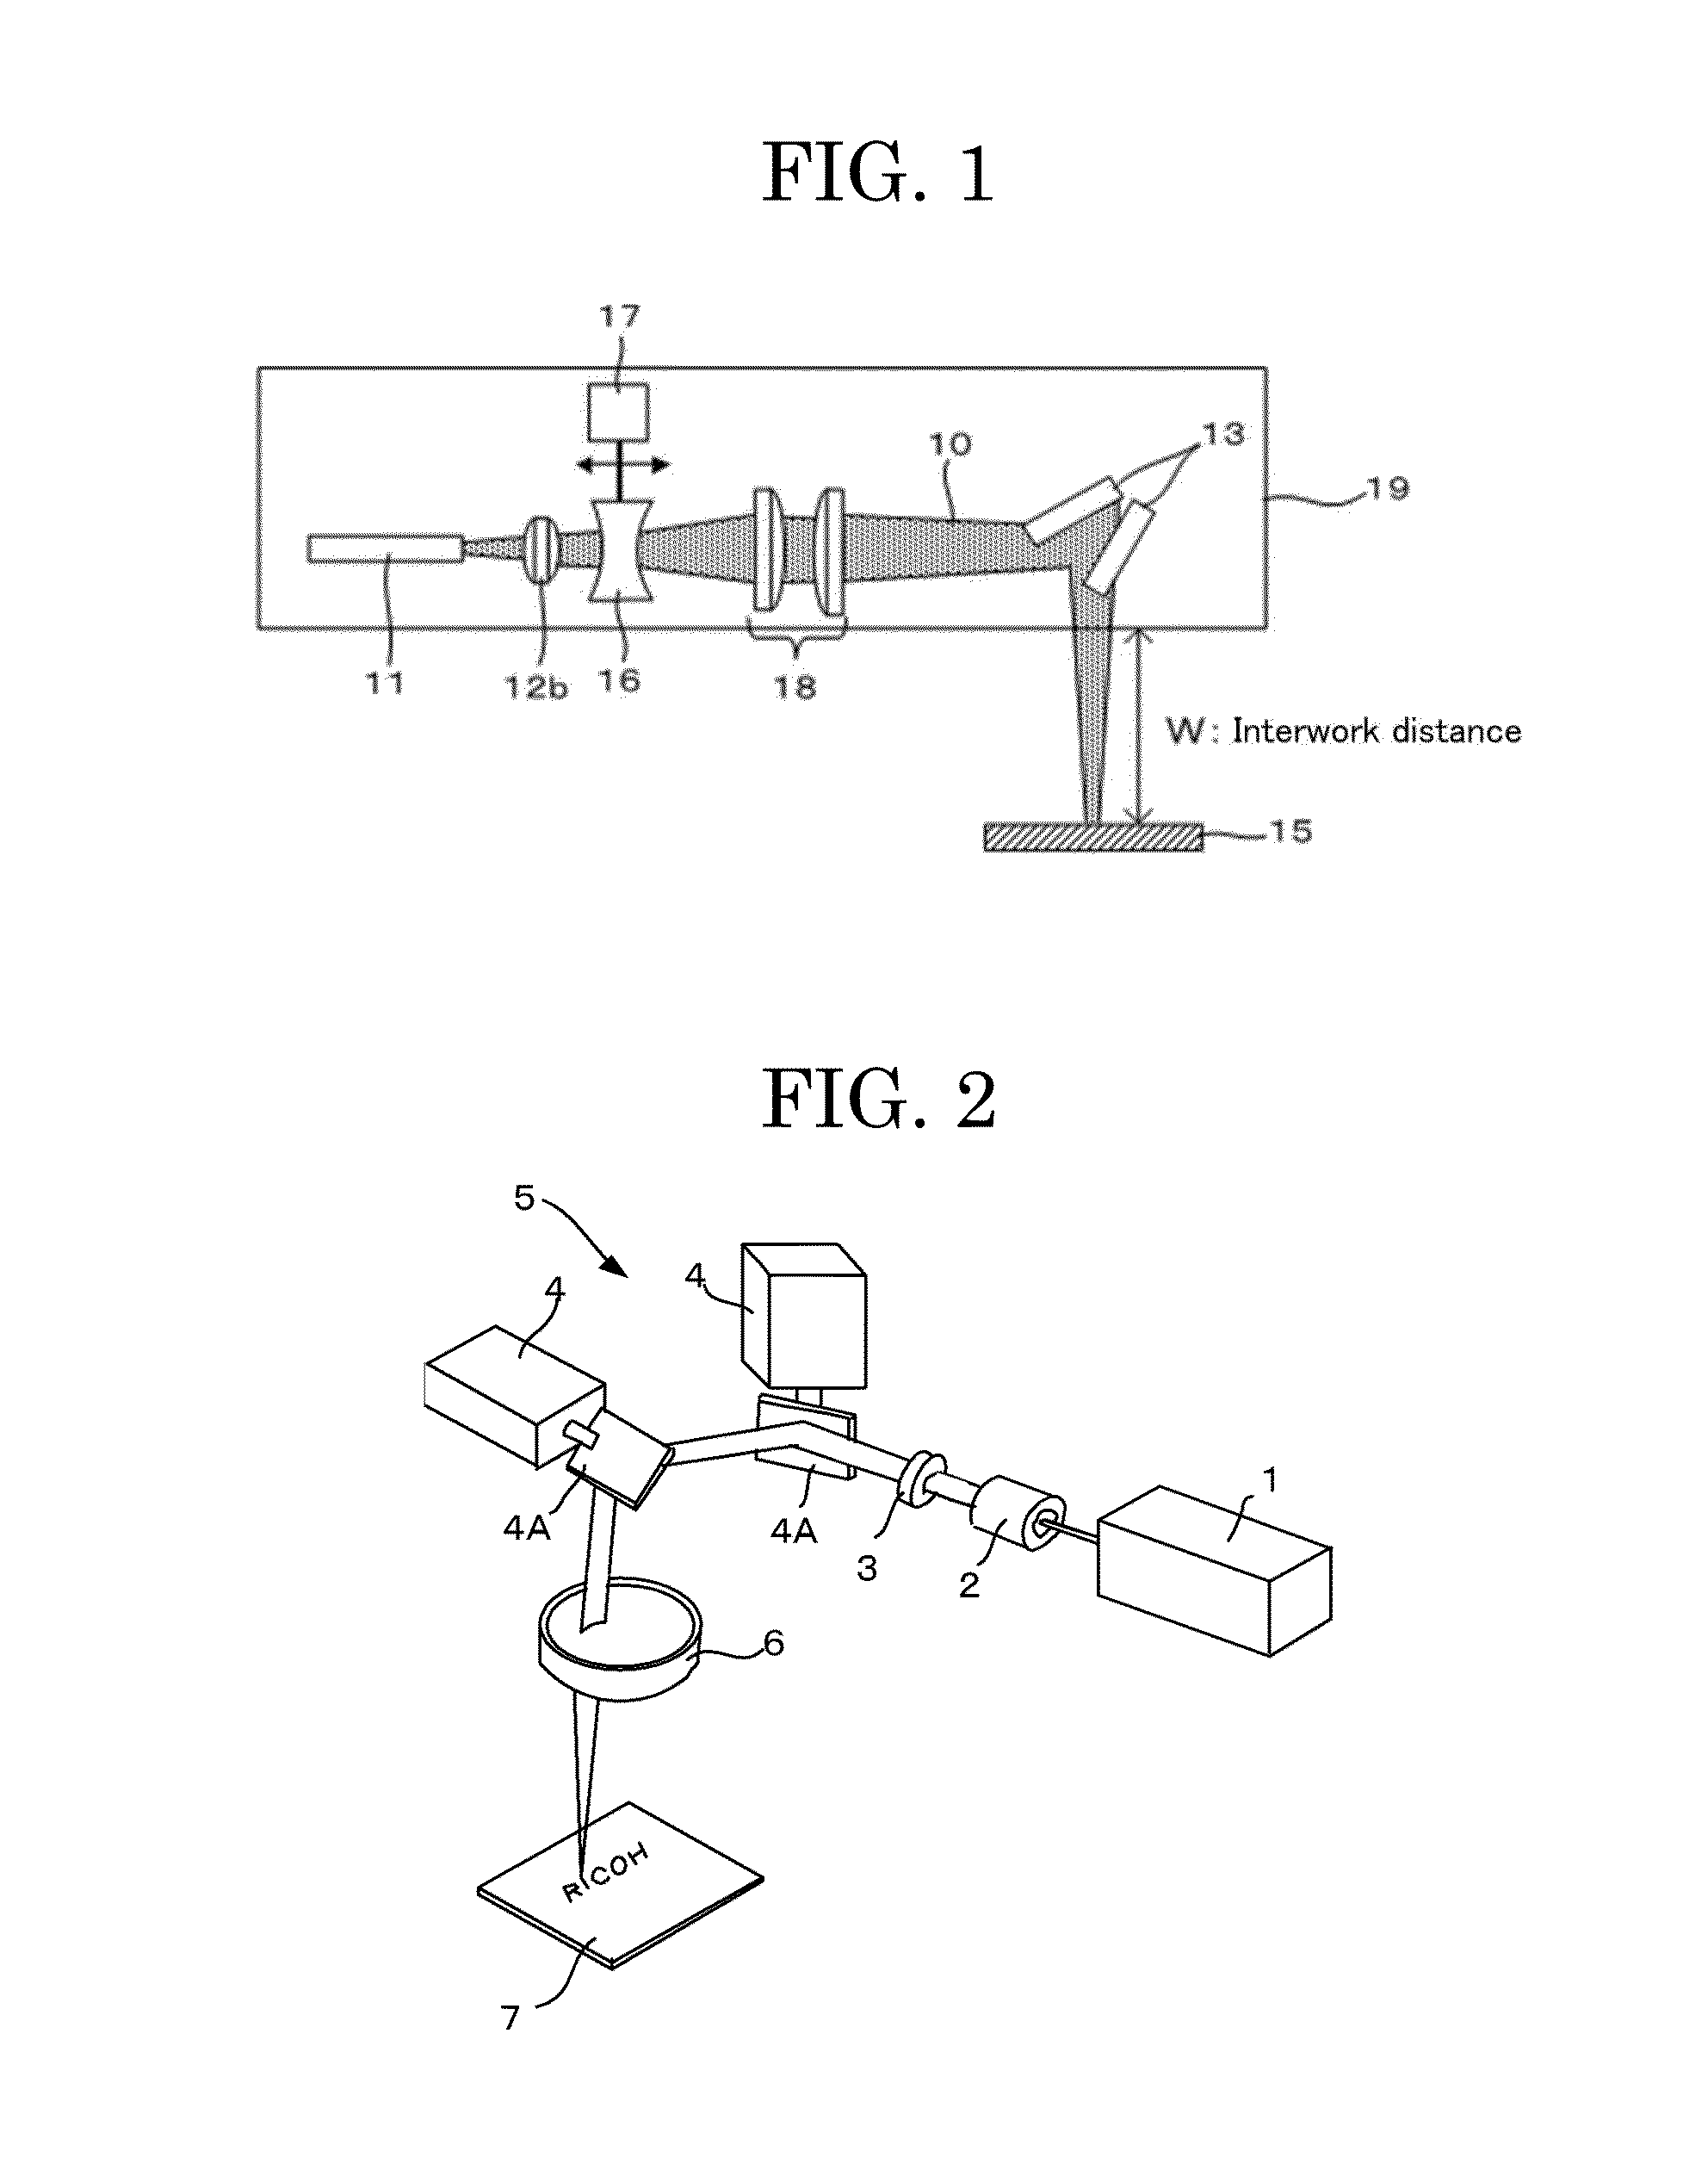 Image processing method, image processing apparatus, and conveyor line system using image processing apparatus